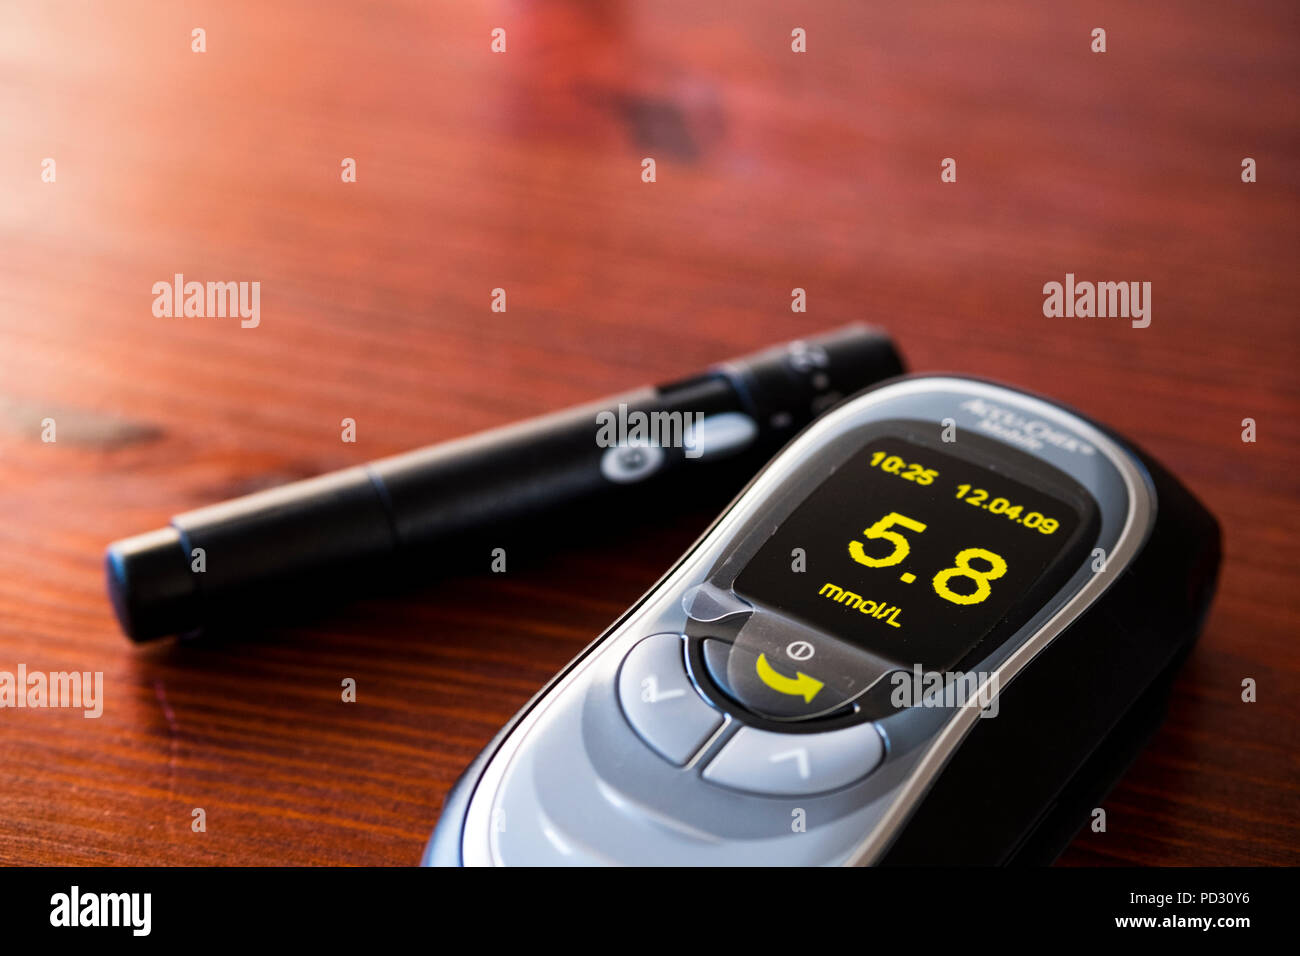 BG meter with lancing device on a kitchen table Stock Photo